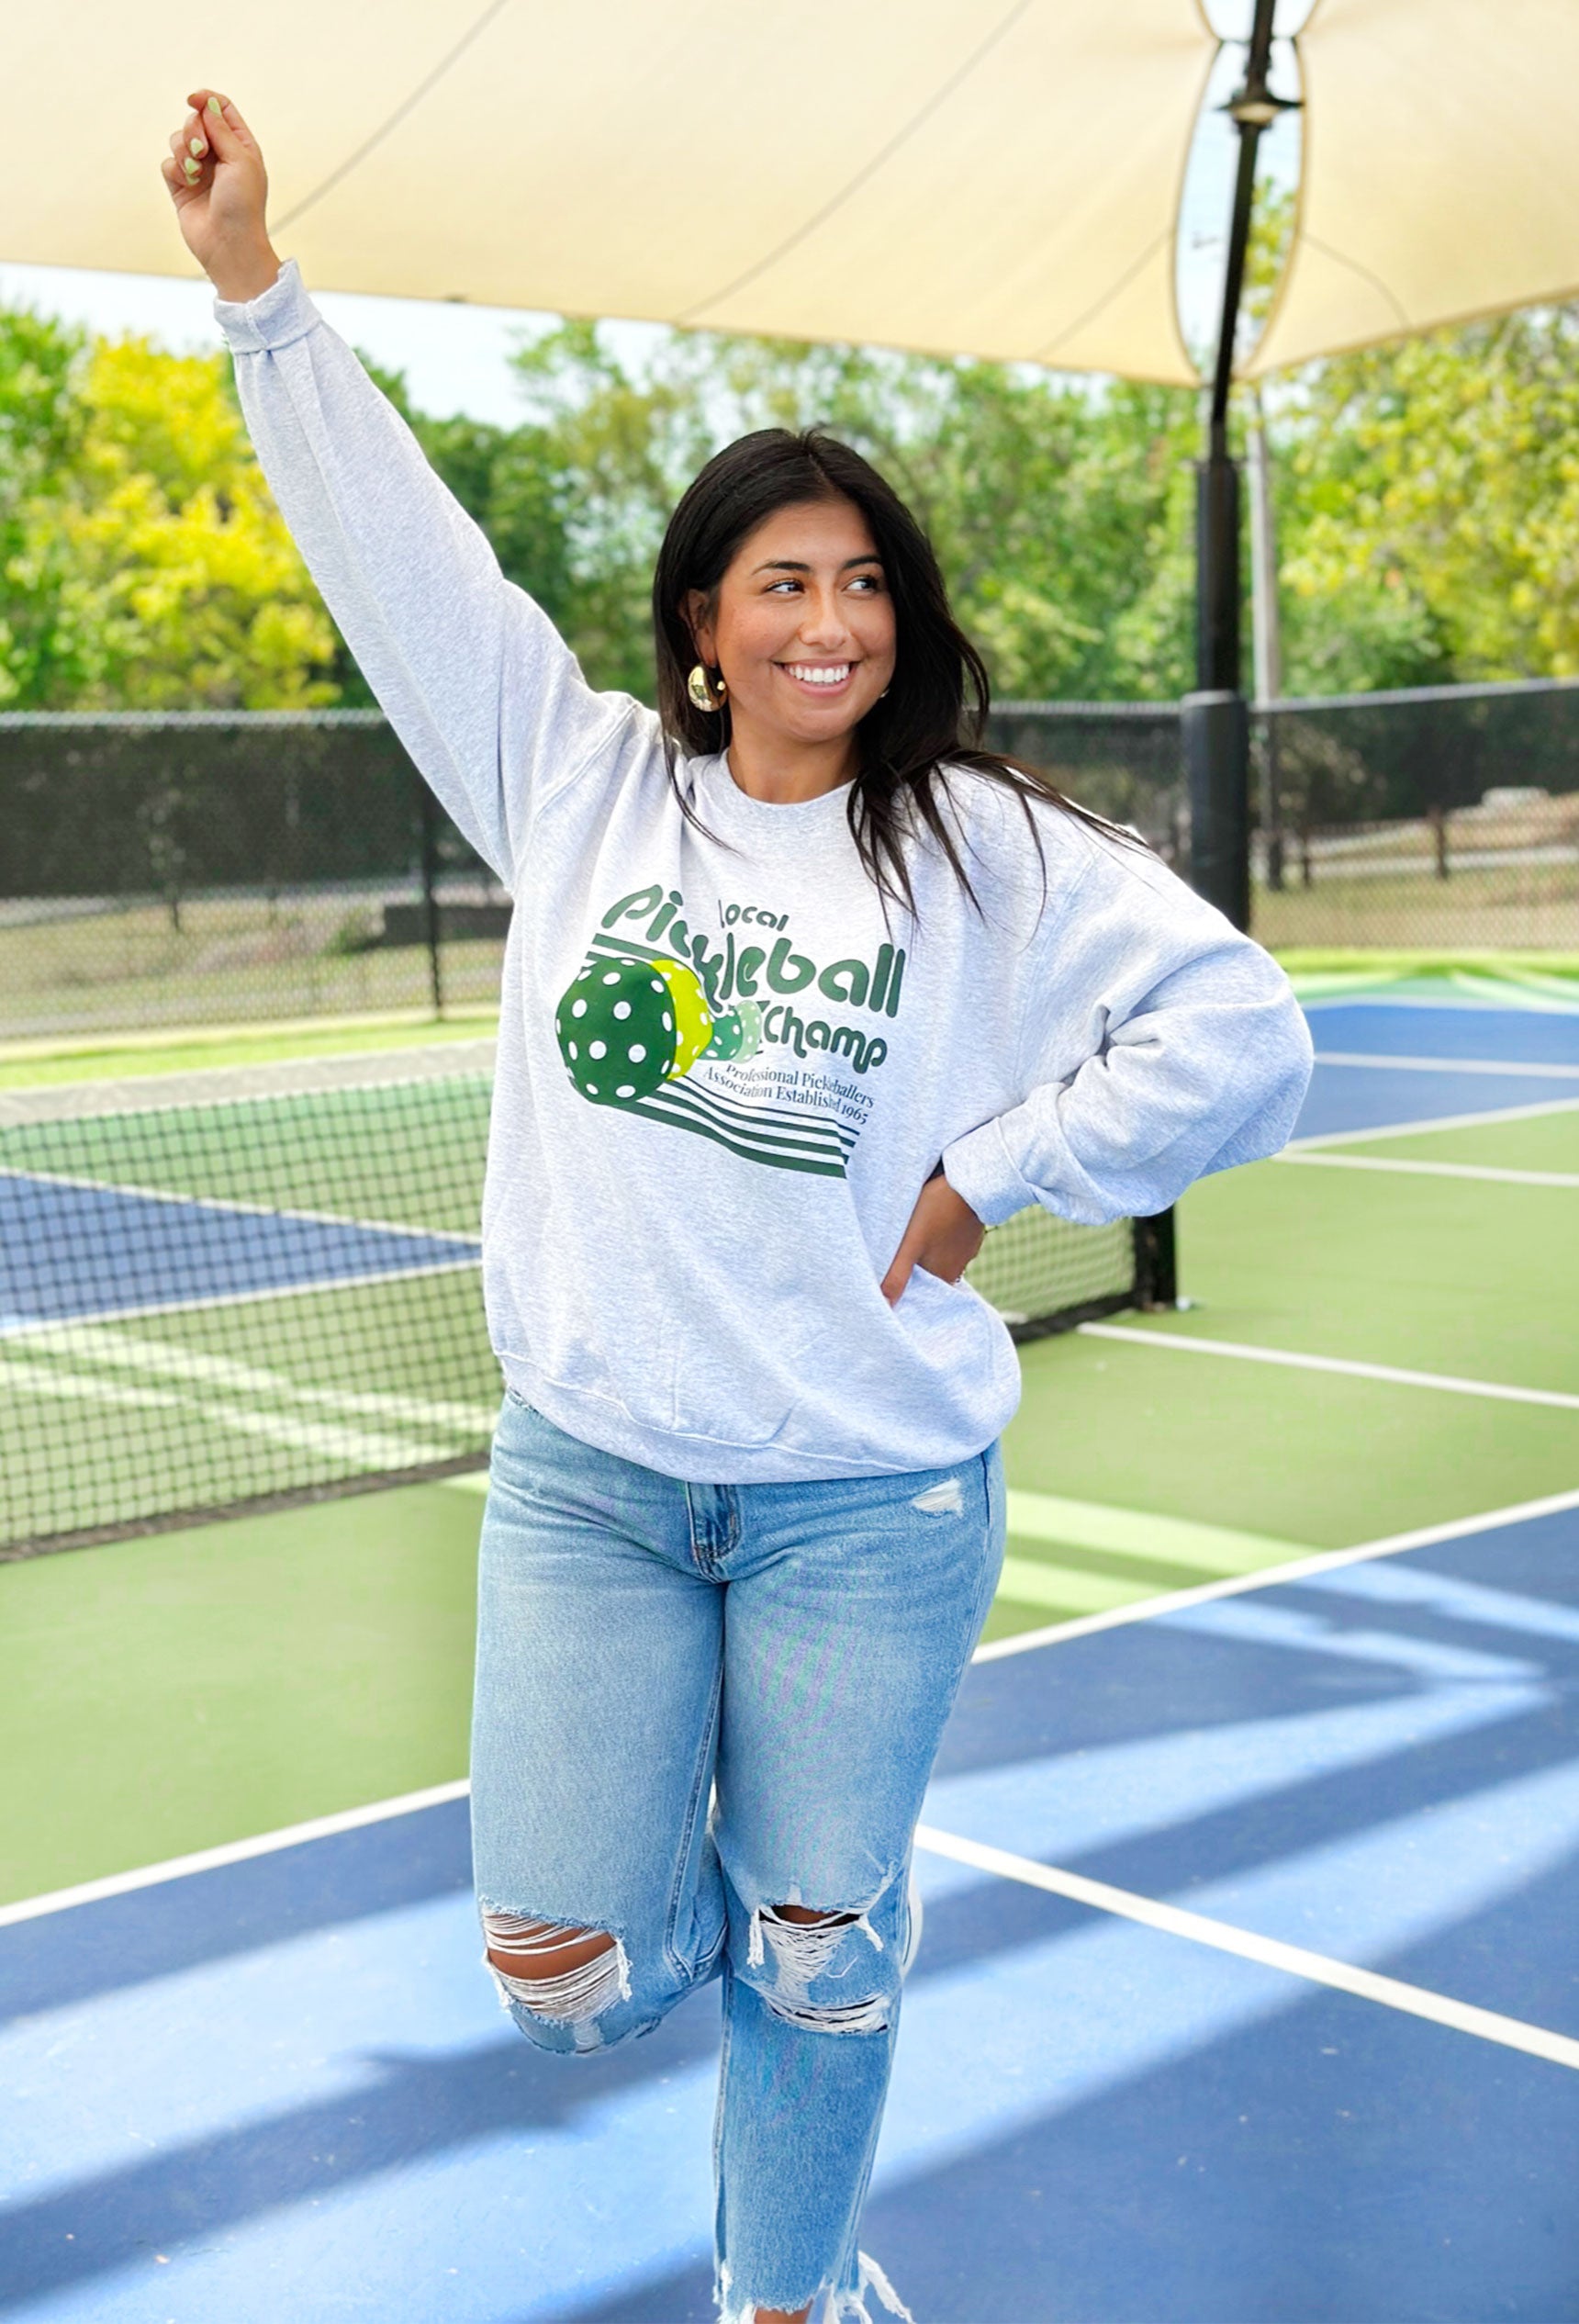 Friday + Saturday: Pickleball Sweatshirt, heather grey crewneck with "local pickleball champ" "professional pickleball association established 1965" in green with pickleball graphics in green